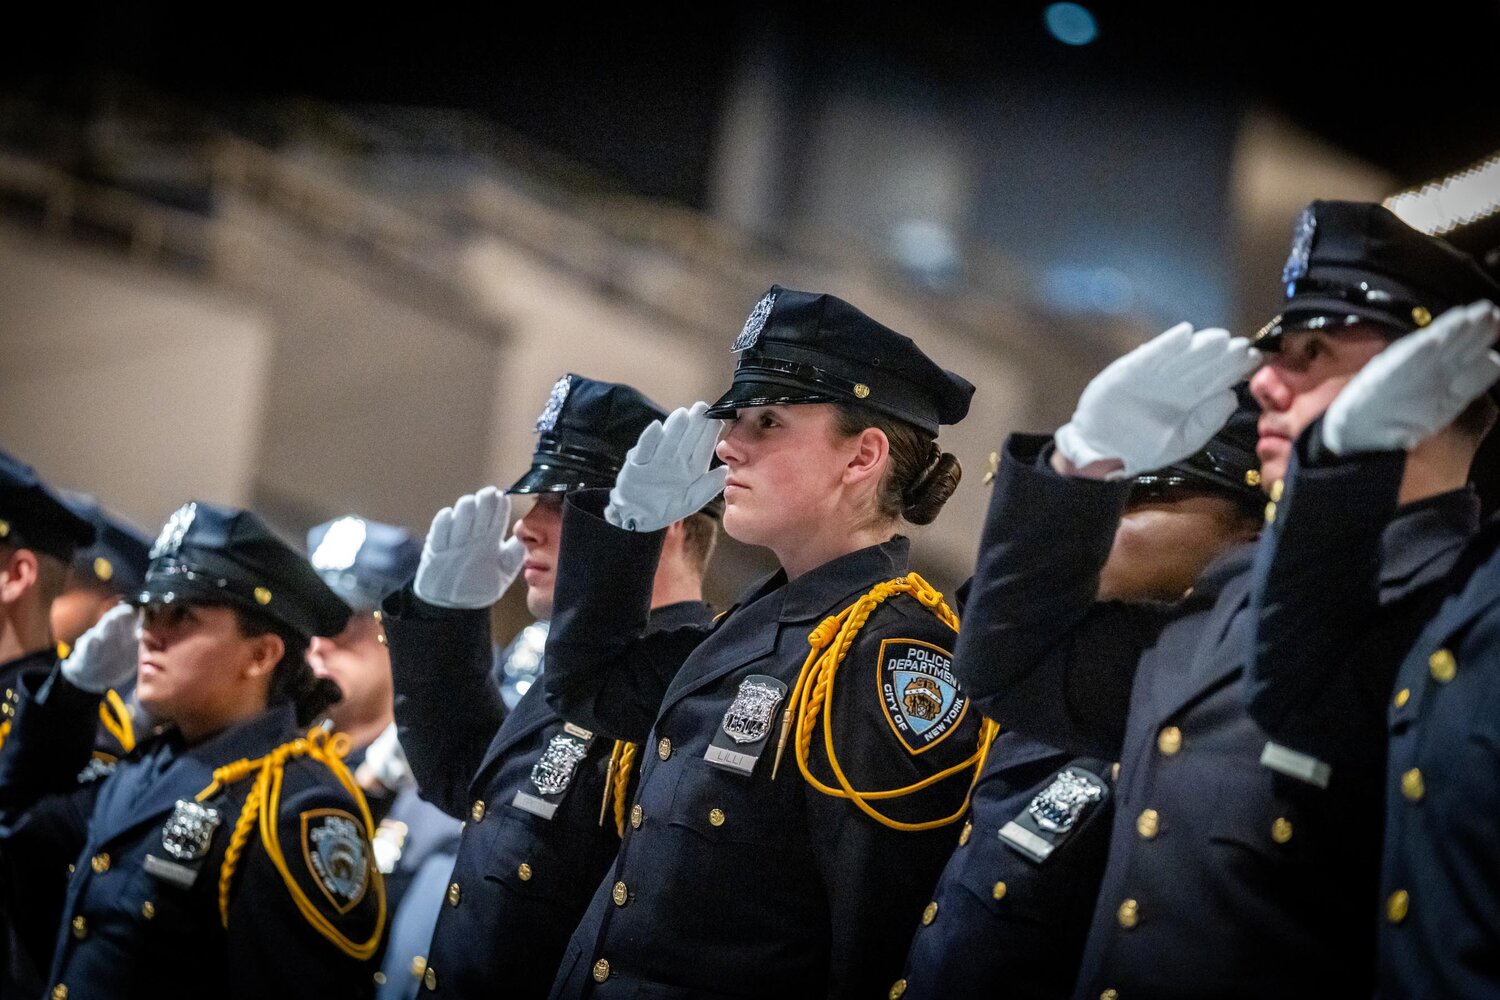 Police recruits at their graduation ceremony Oct. 30 at Madison Square Garden’s Hulu Theater. The 390 graduates will be among the last to join the department in at least 18 months following the announcement that the city has canceled five police academy classes. To address a growing budget gap, municipal agencies are cutting nearly 2,900 unfilled positions, moves denounced by District Council 37, the largest union representing city workers.